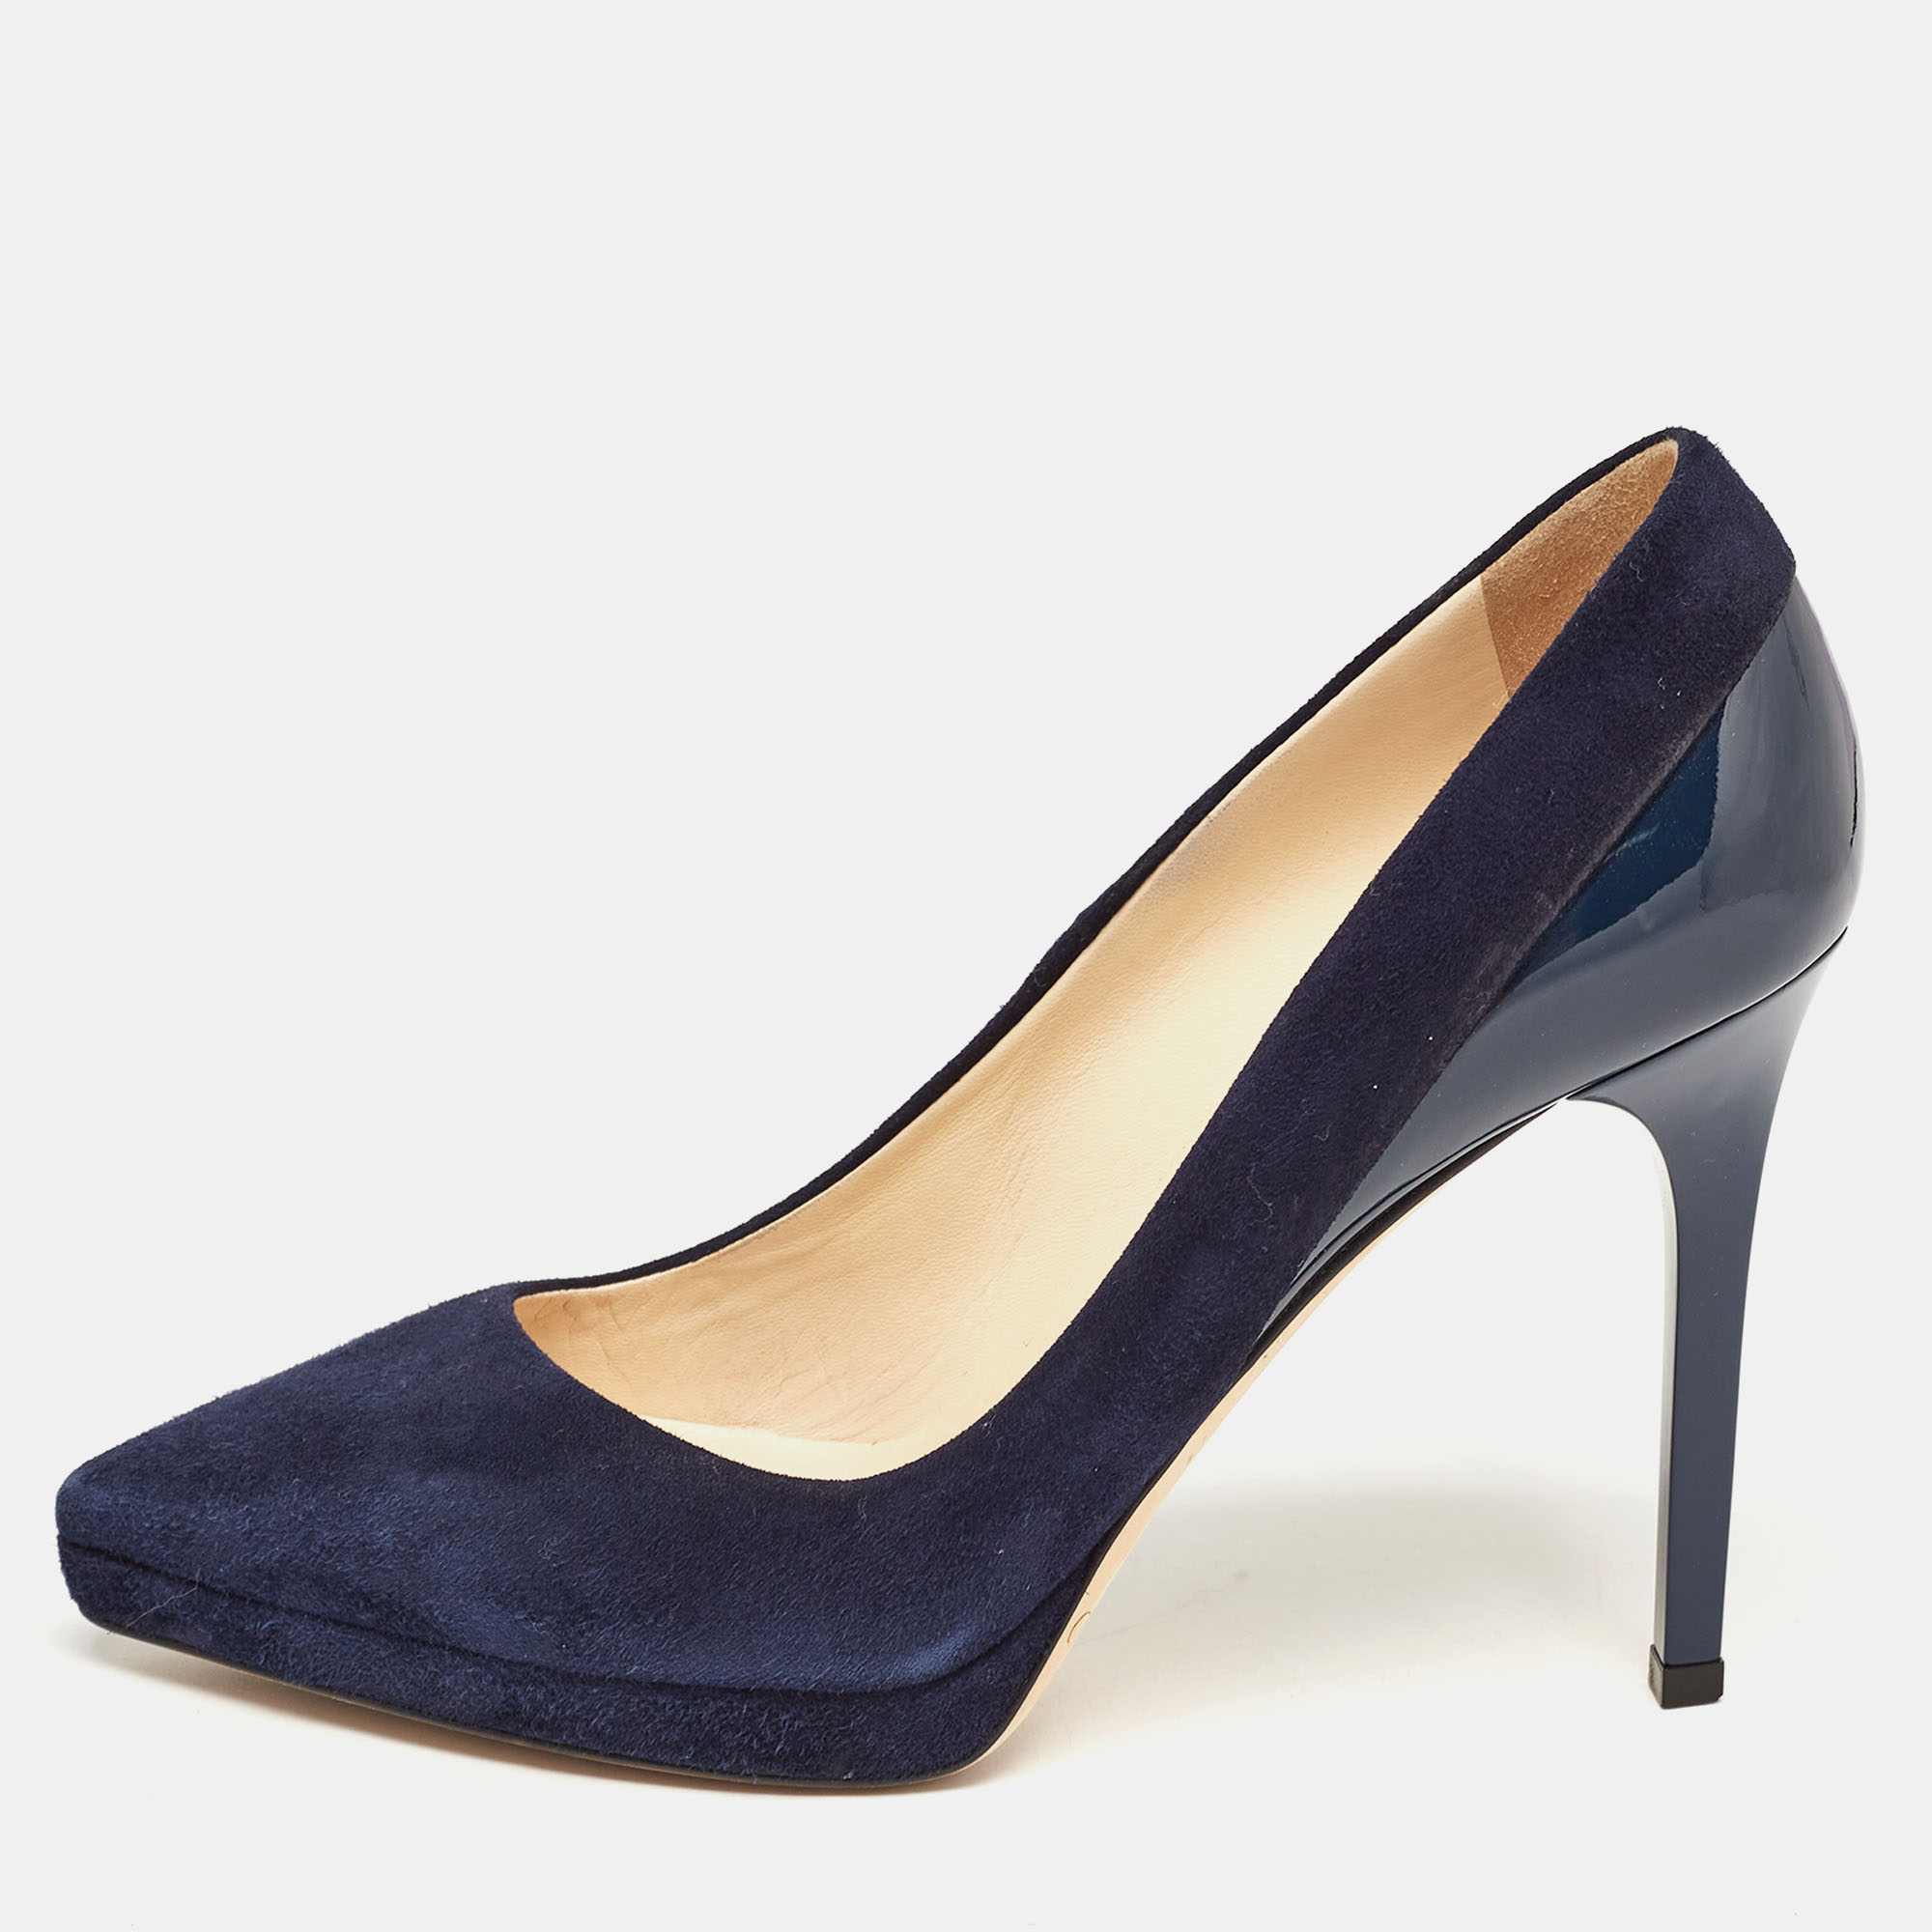 Pre-owned Jimmy Choo Navy Blue Suede And Patent Rudy Pumps Size 36.5